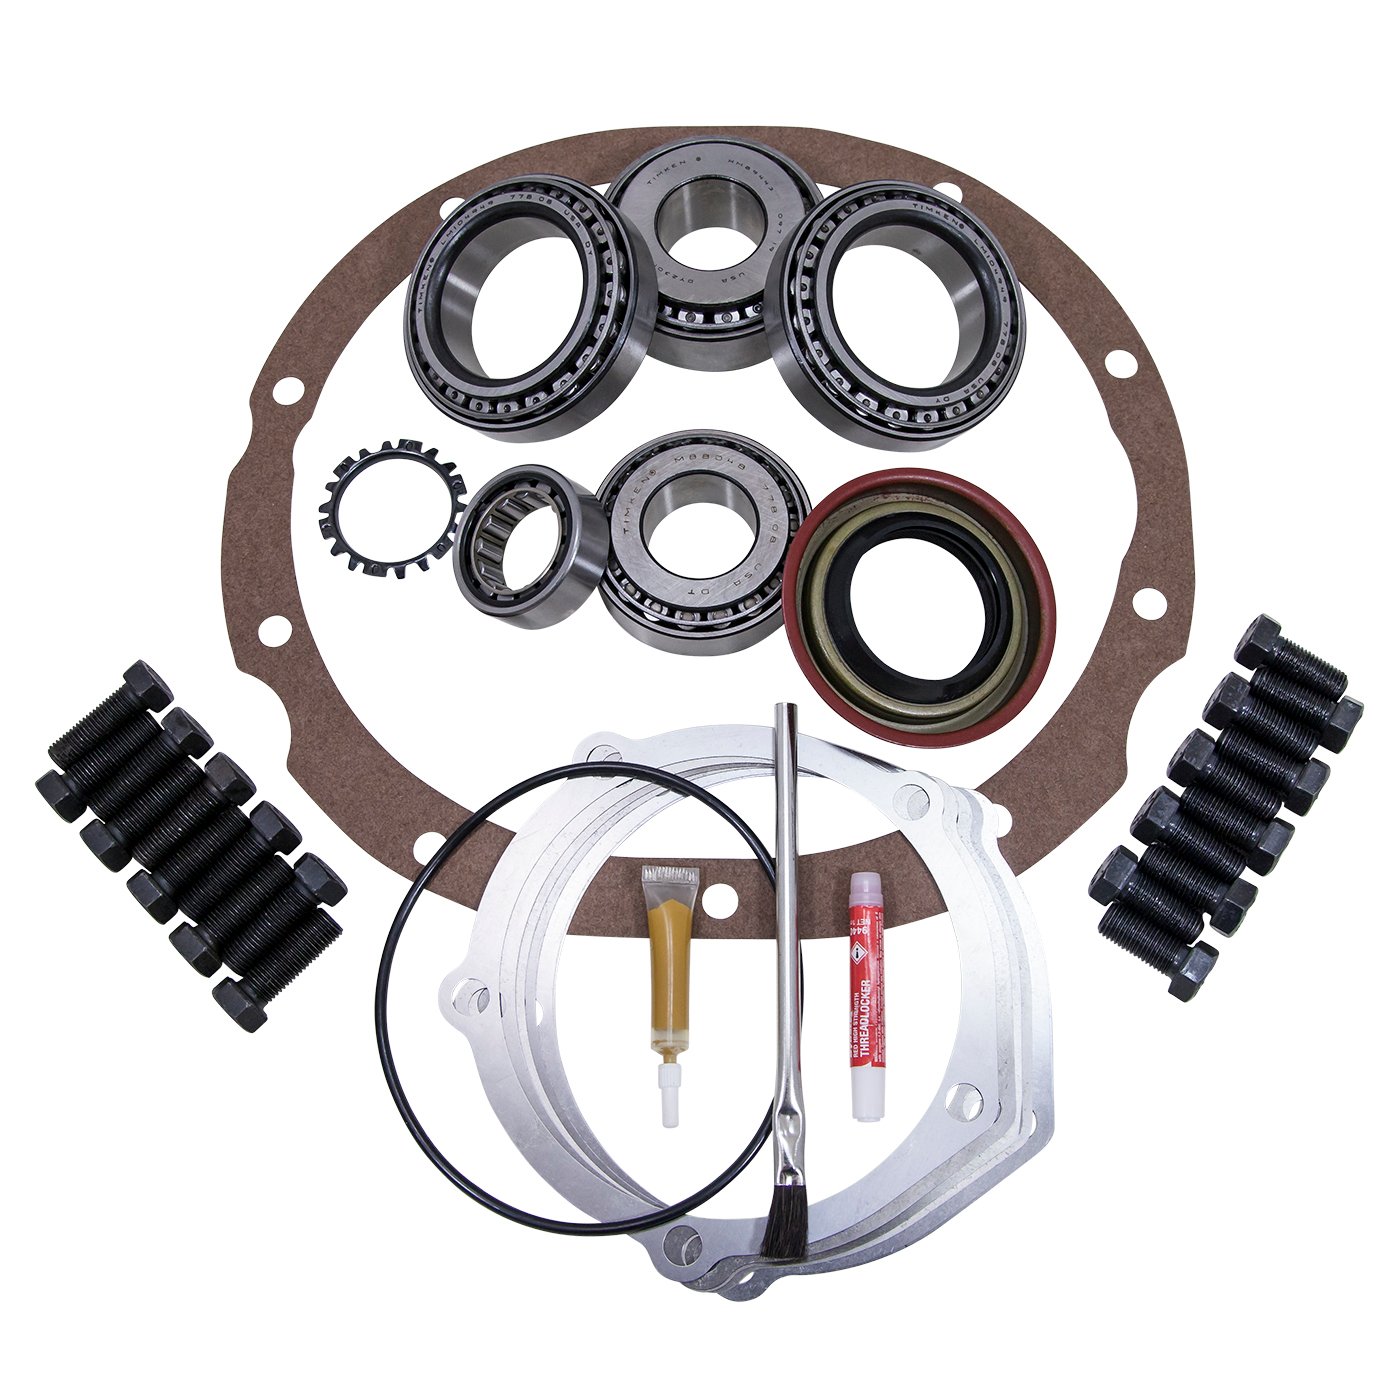 USA Standard ZK F9-C-SPC Master Overhaul Kit, For d 9 in. Lm603011 Differential W/ Solid Spacer